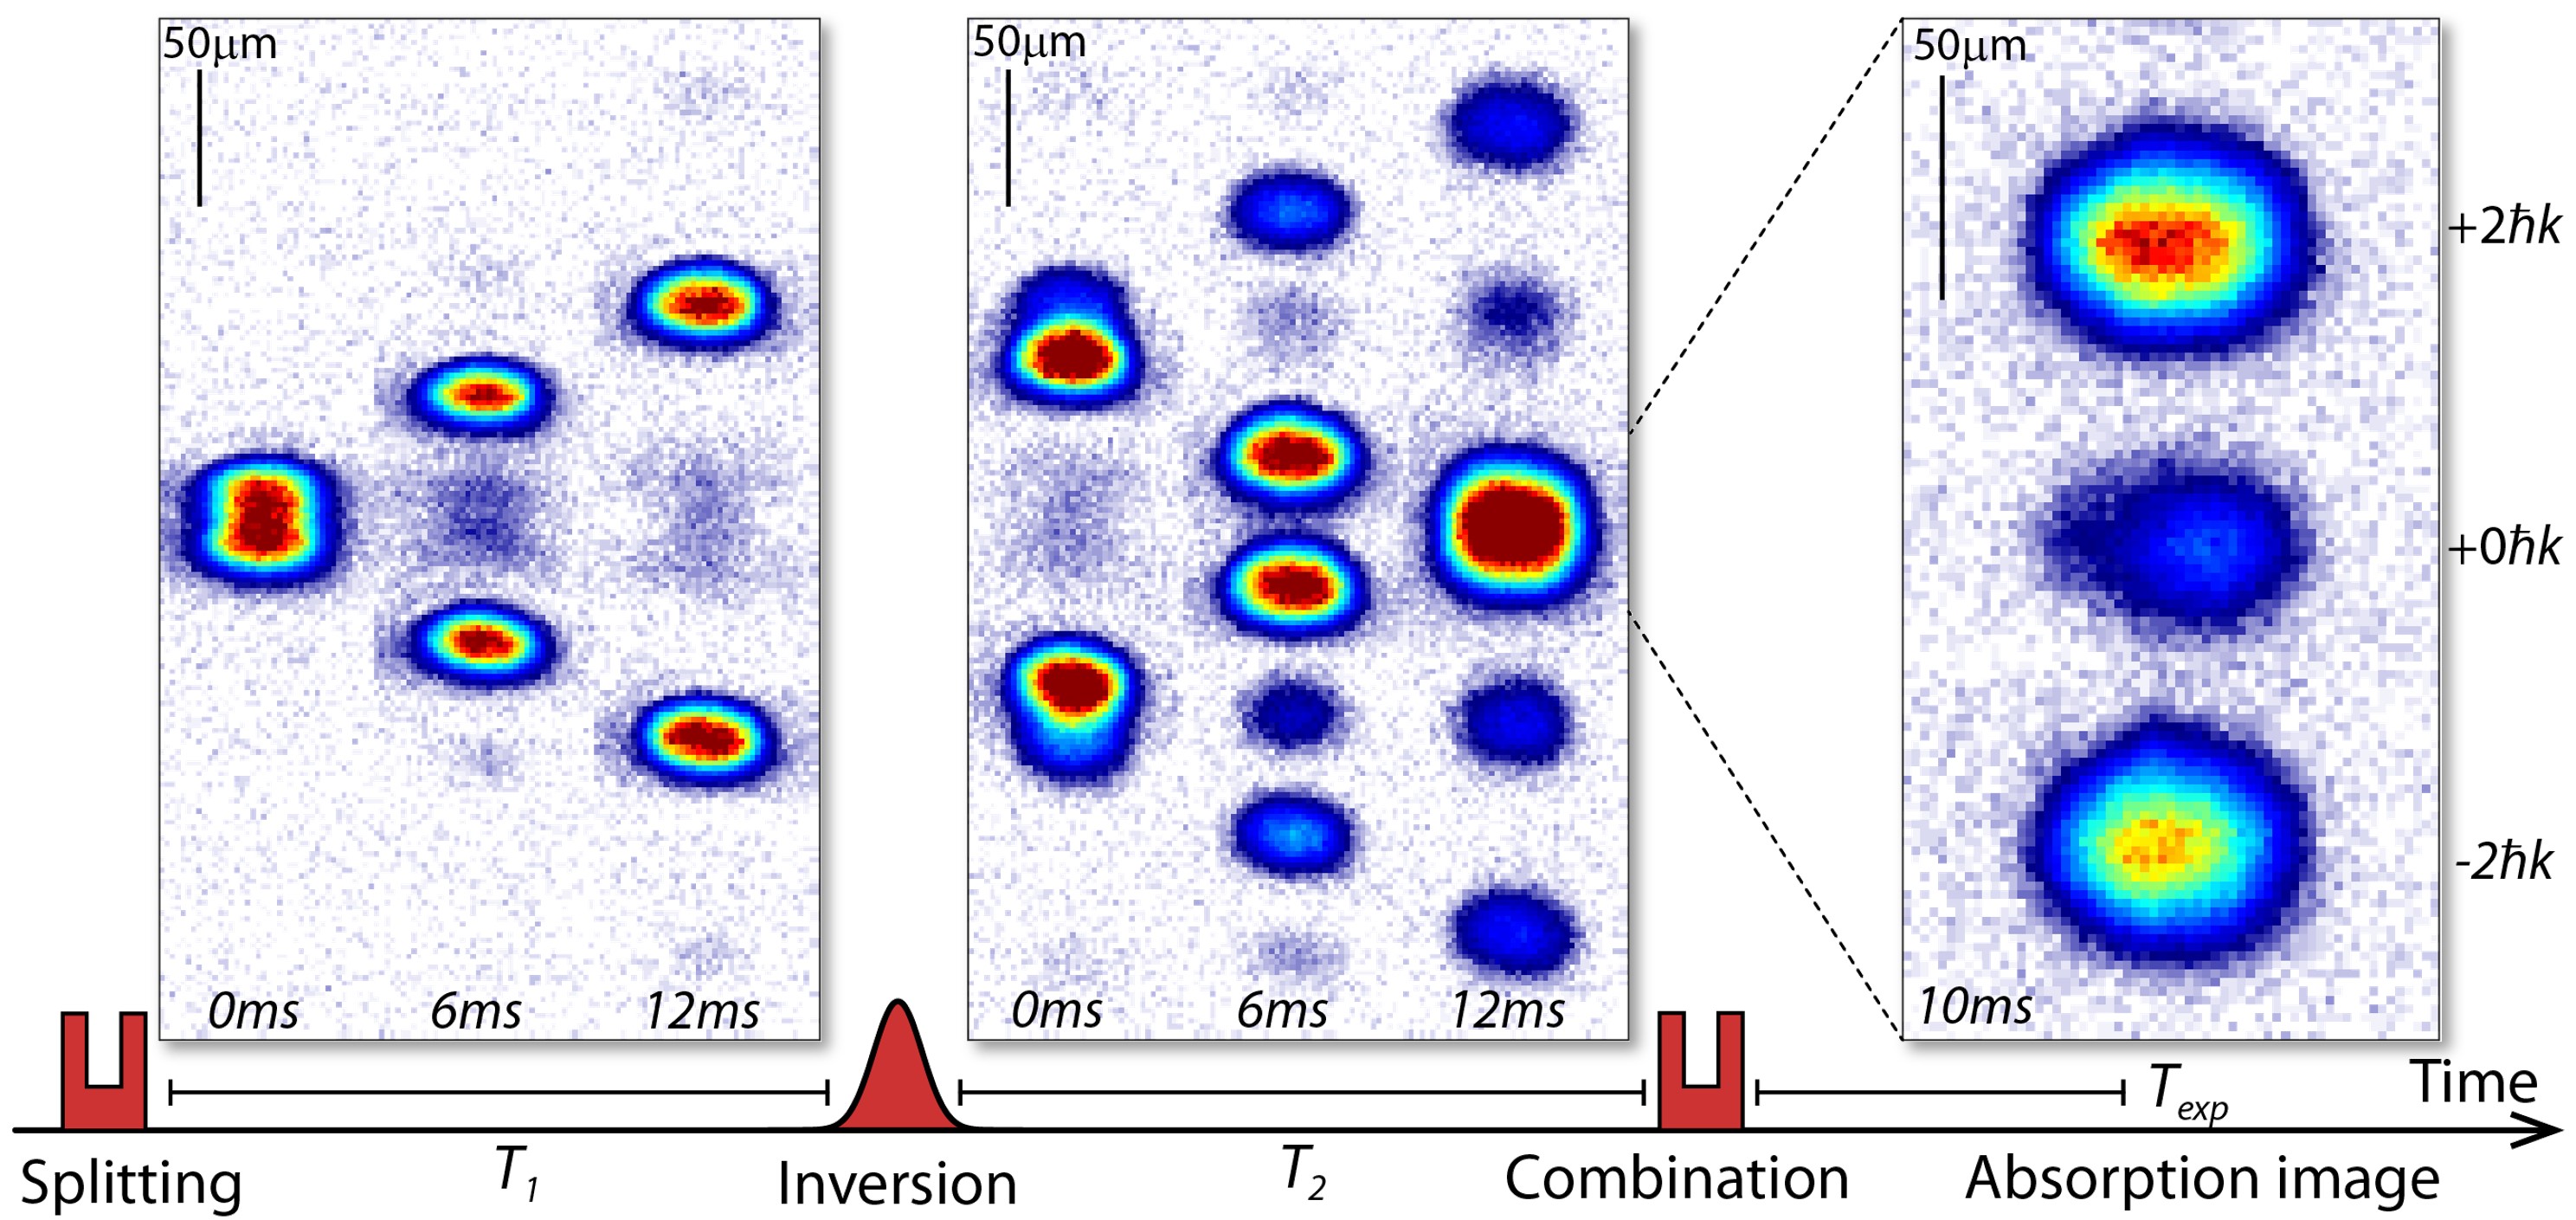 Absorption images of 3-pulse Michelson interferometer scheme